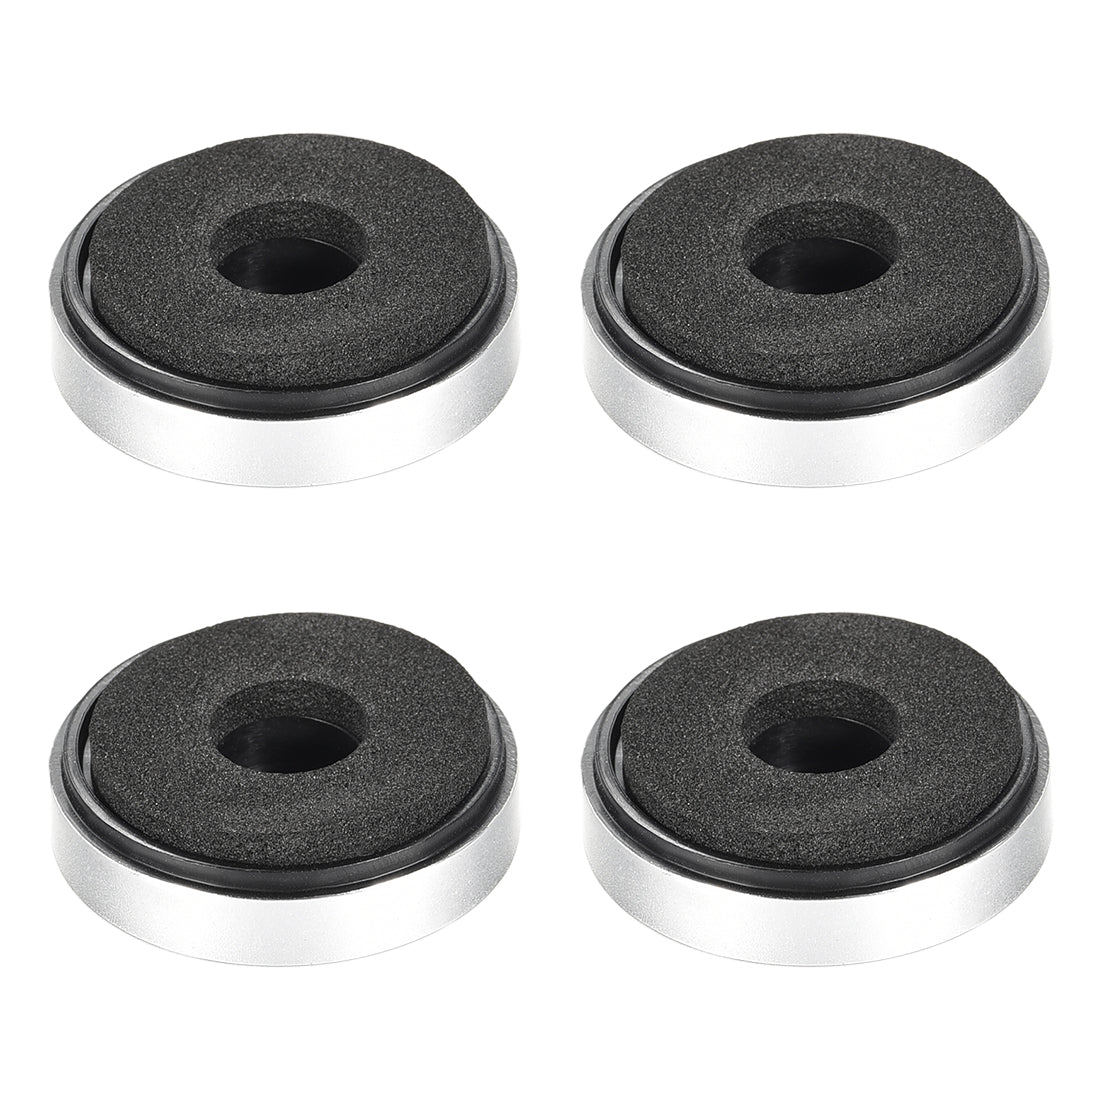 uxcell Uxcell 4 Pcs D30xH8mm Plastic Feet Anti-Vibration Base Pad Stand for Speaker Guitar Amplifier HiFi Silver Tone